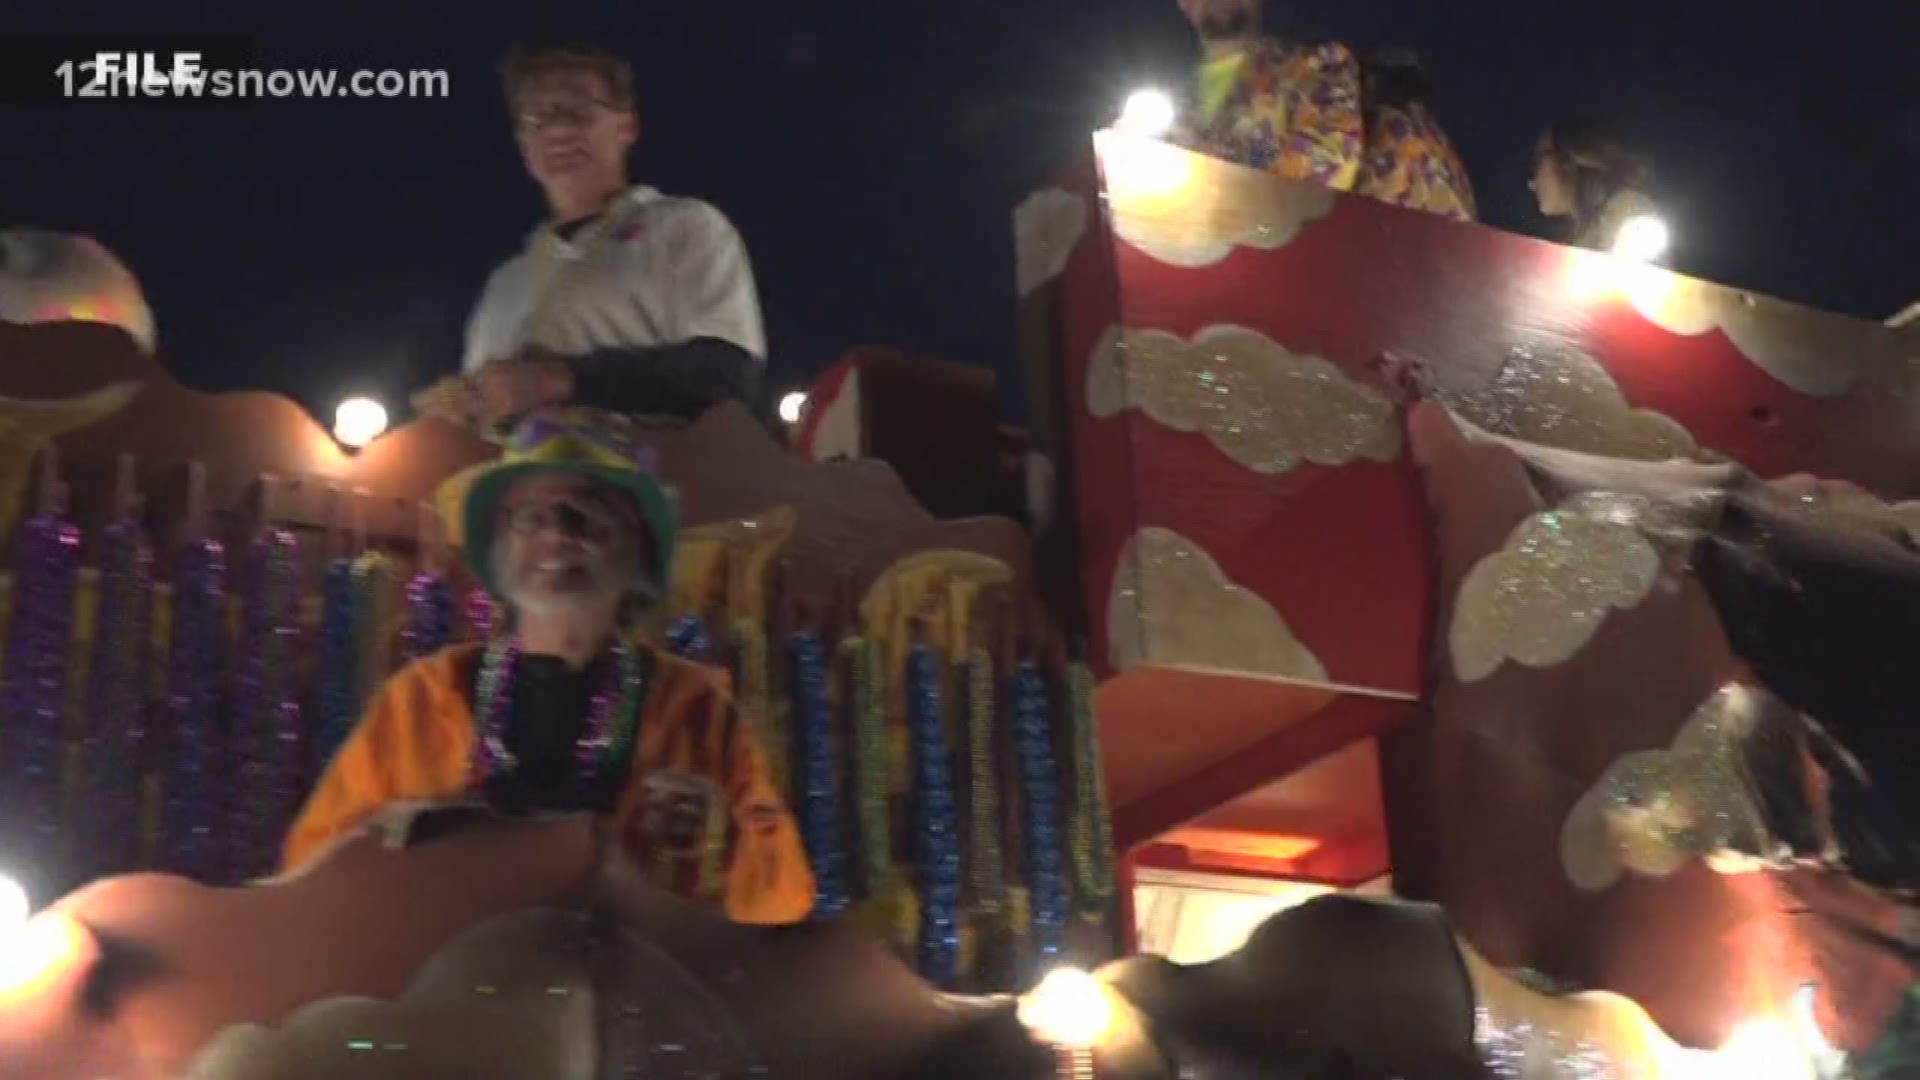 Mardi Gras Southeast Texas is just three weeks away, and organizers are promising this year will be bigger and better than ever before.